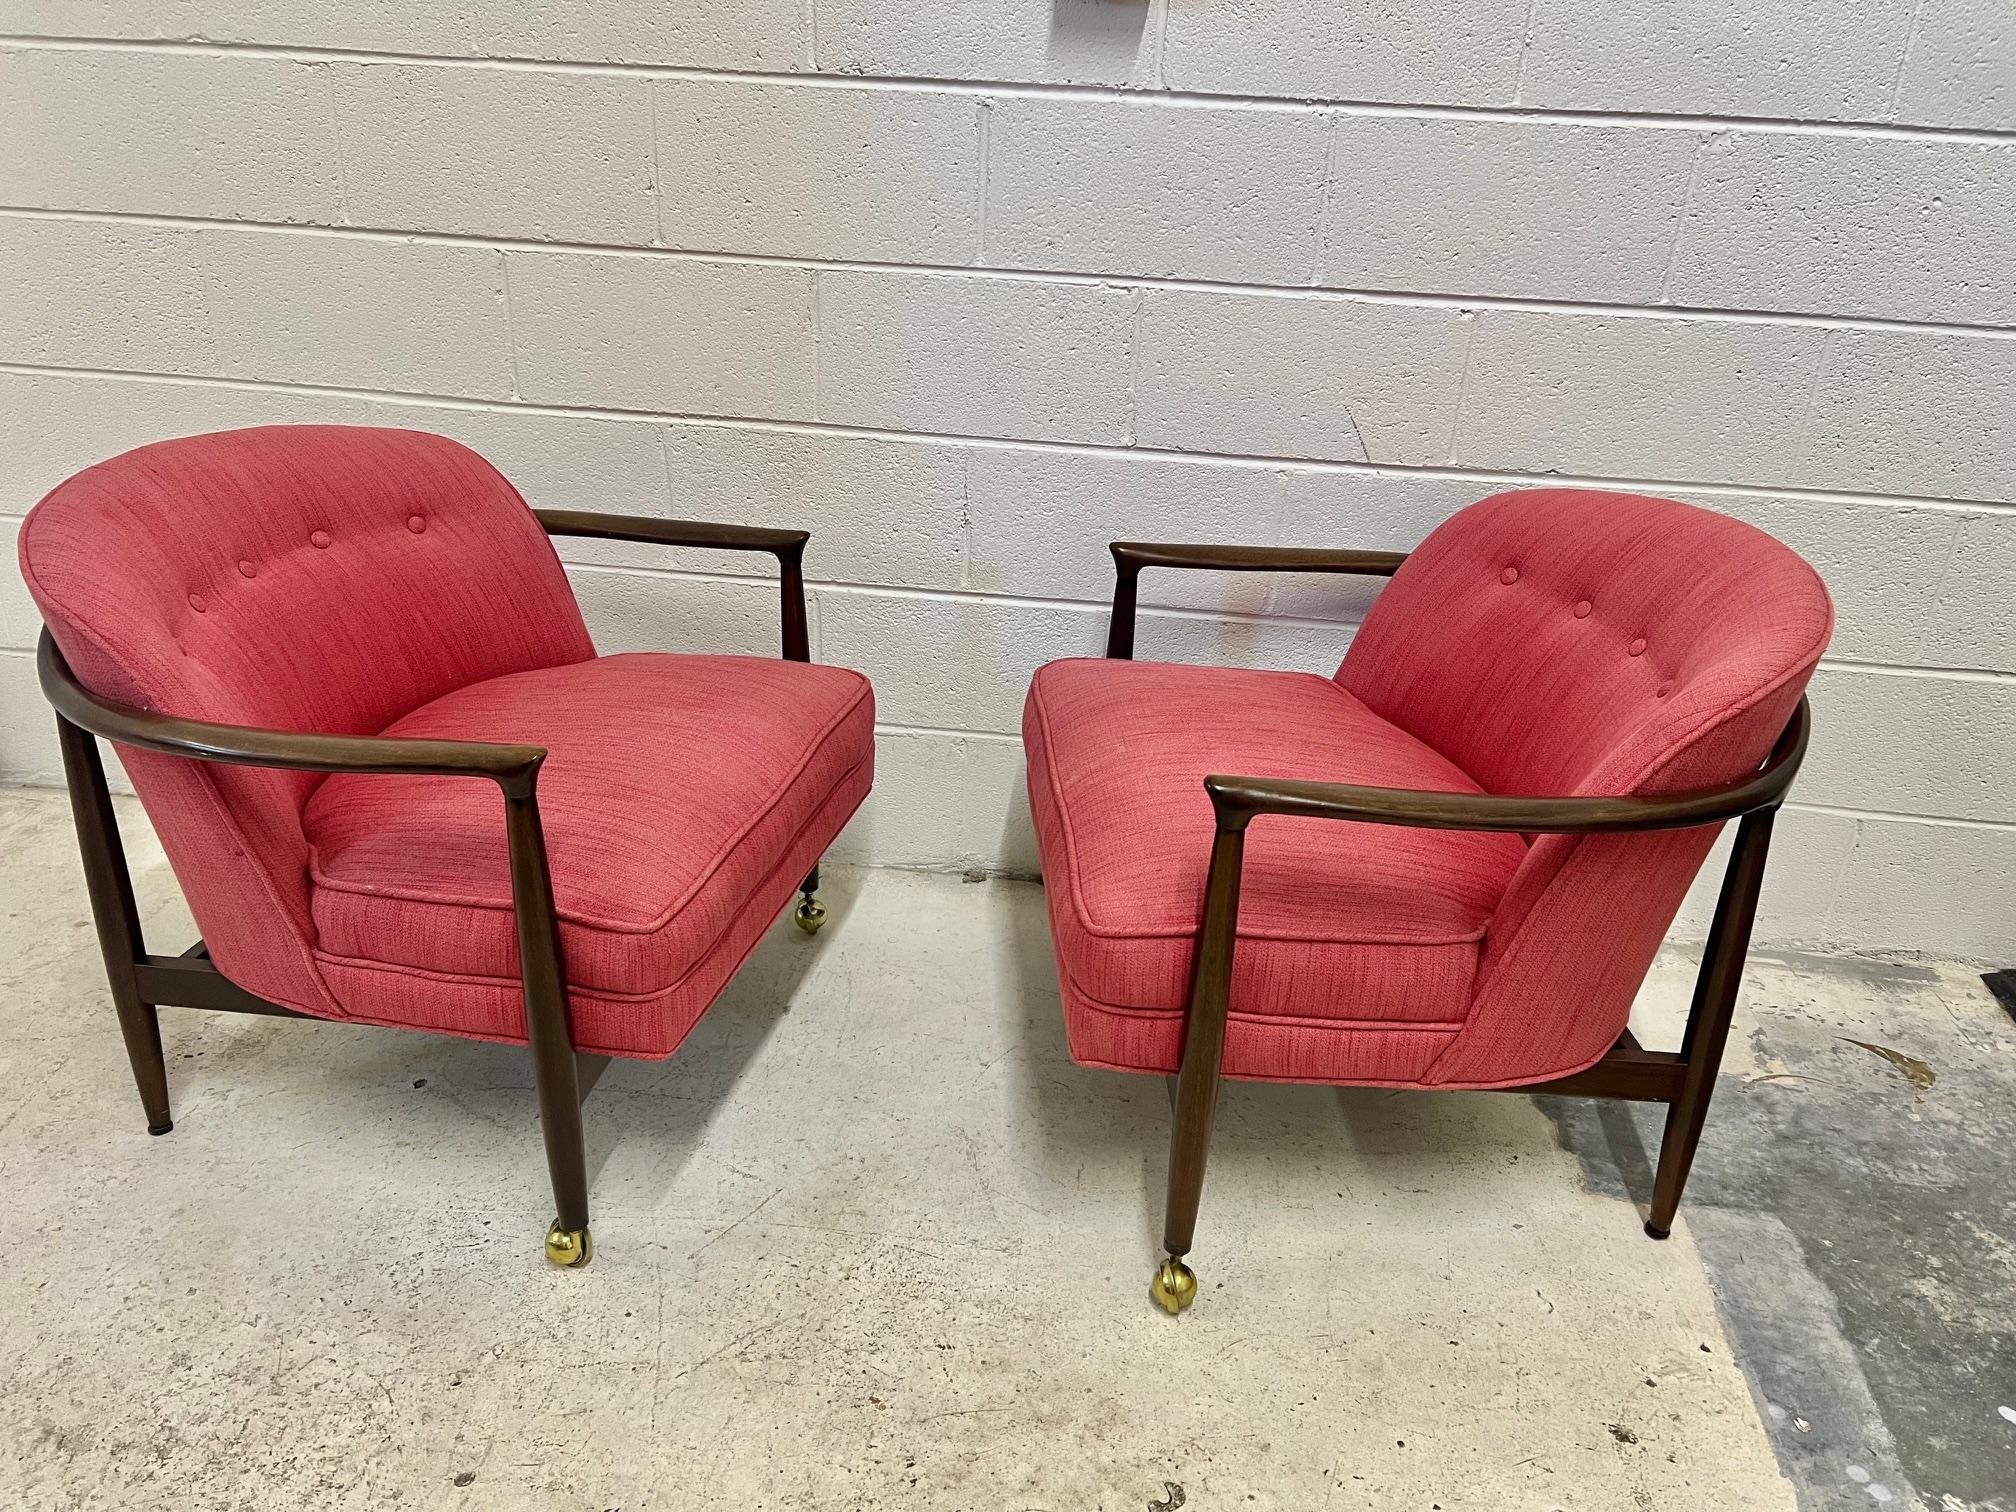 Mid century modern walnut lounge barel club chairs by Finn Andersen for Selig. Price is for one chair. Original label underneath the chair. Upholstery appears to be original and is in very good condition. Some stains as shown in pictures. Wood frame